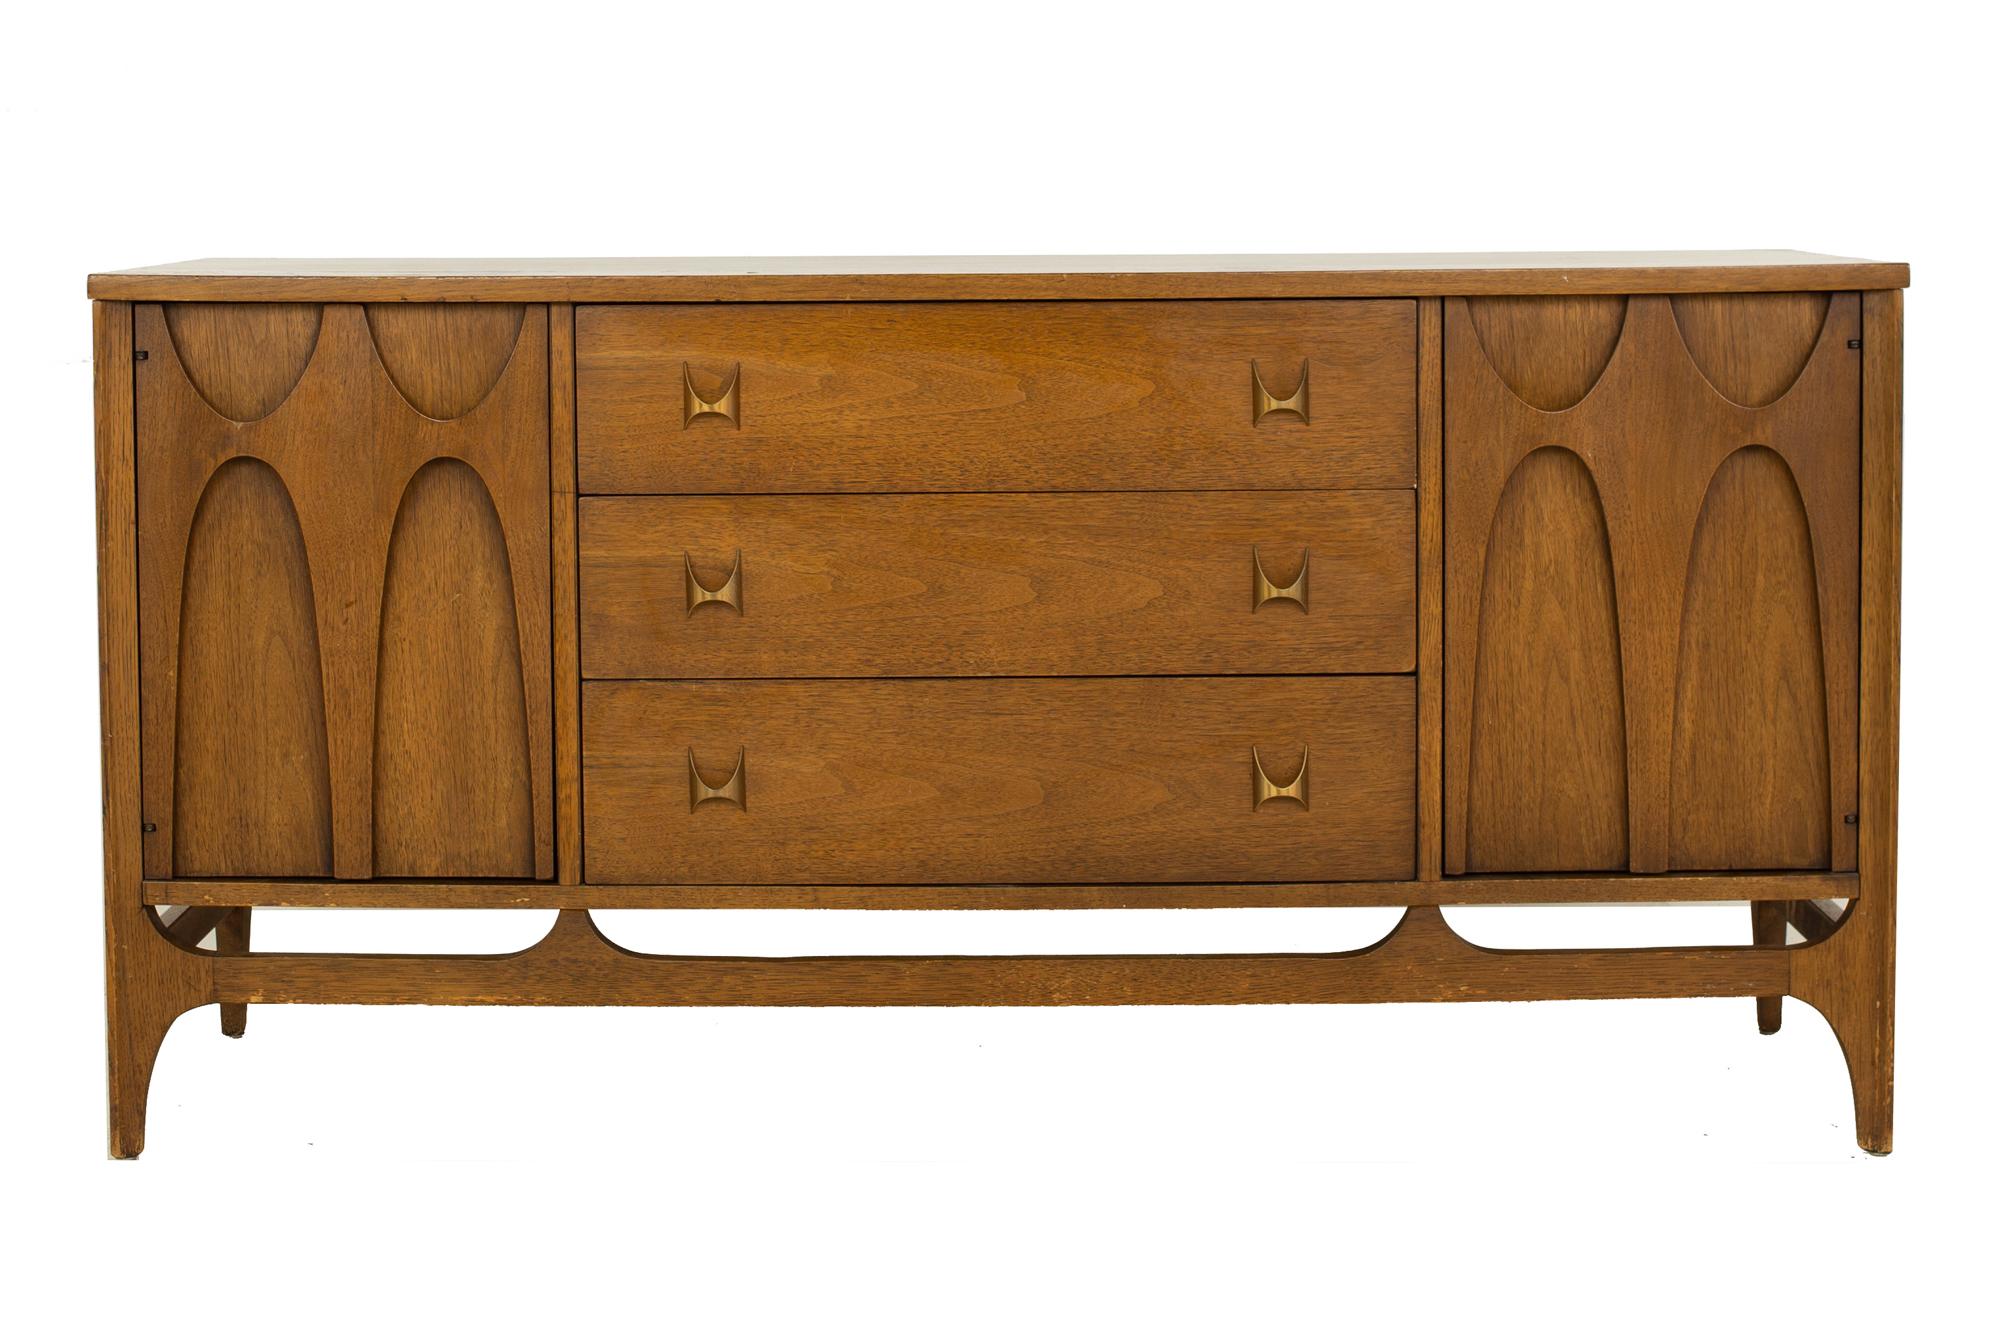 Broyhill Brasilia Mid century sideboard buffet credenza

Credenza measures: 56 wide x 17 deep x 28 inches high

All pieces of furniture can be had in what we call restored vintage condition. That means the piece is restored upon purchase so it’s